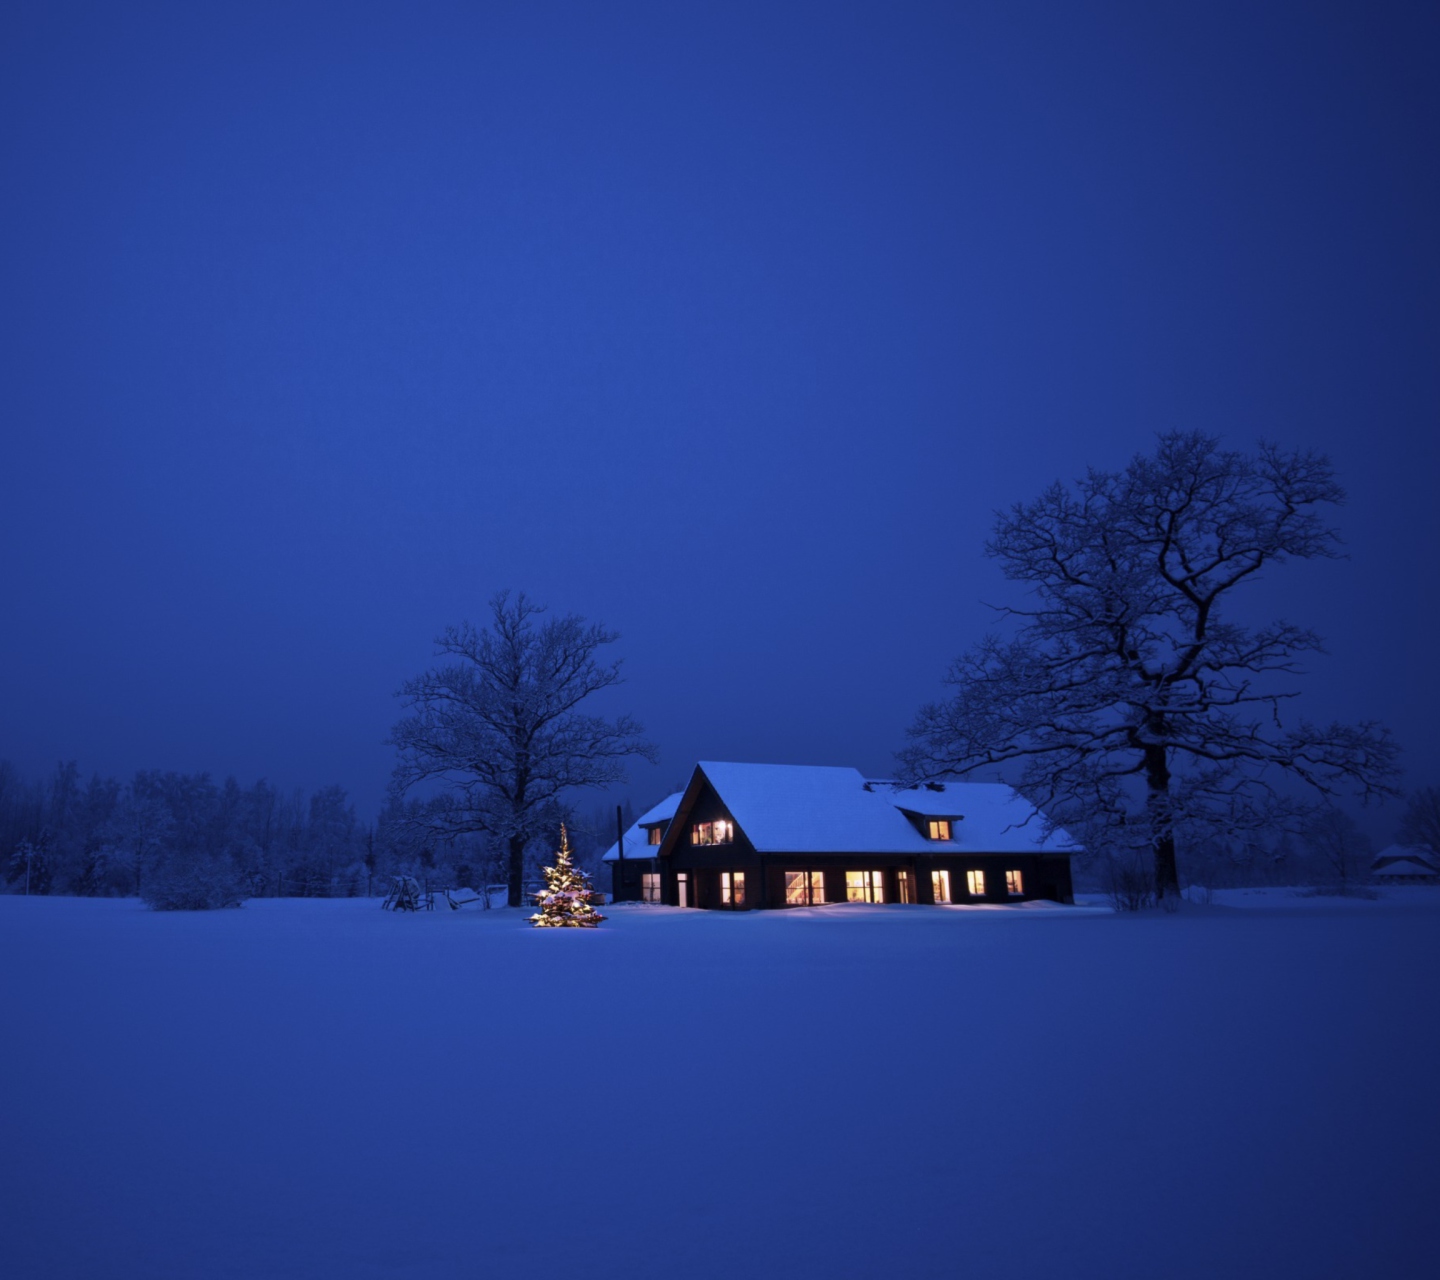 Das Lonely House, Winter Landscape And Christmas Tree Wallpaper 1440x1280